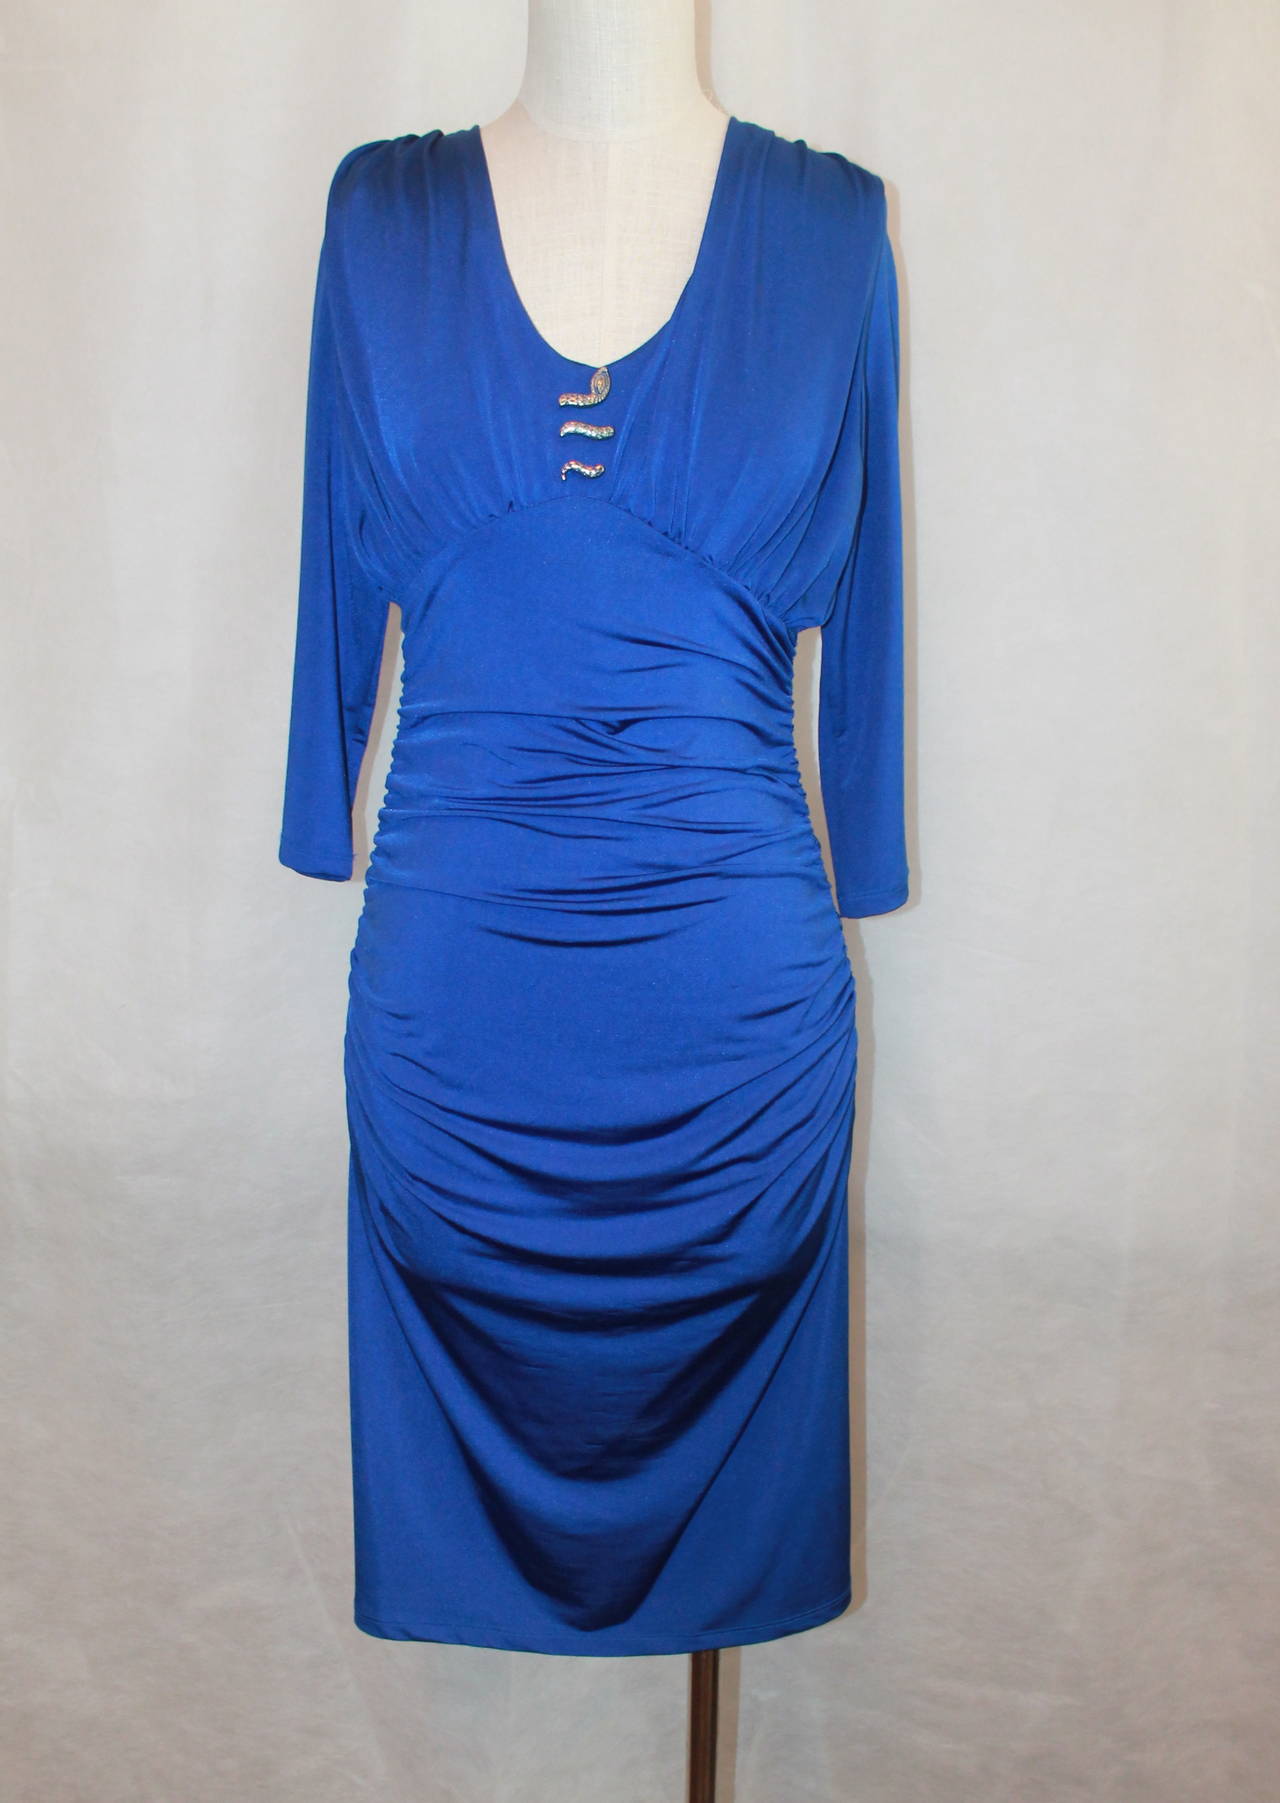 Roberto Cavalli Royal Blue Jersey Ruching 3/4 Sleeve Dress - S - NWT. This dress is in very good condition with minor pulling in the front/middle (image 5). There is ruching on the sides of the dress and a main one in the middle of the back. It has